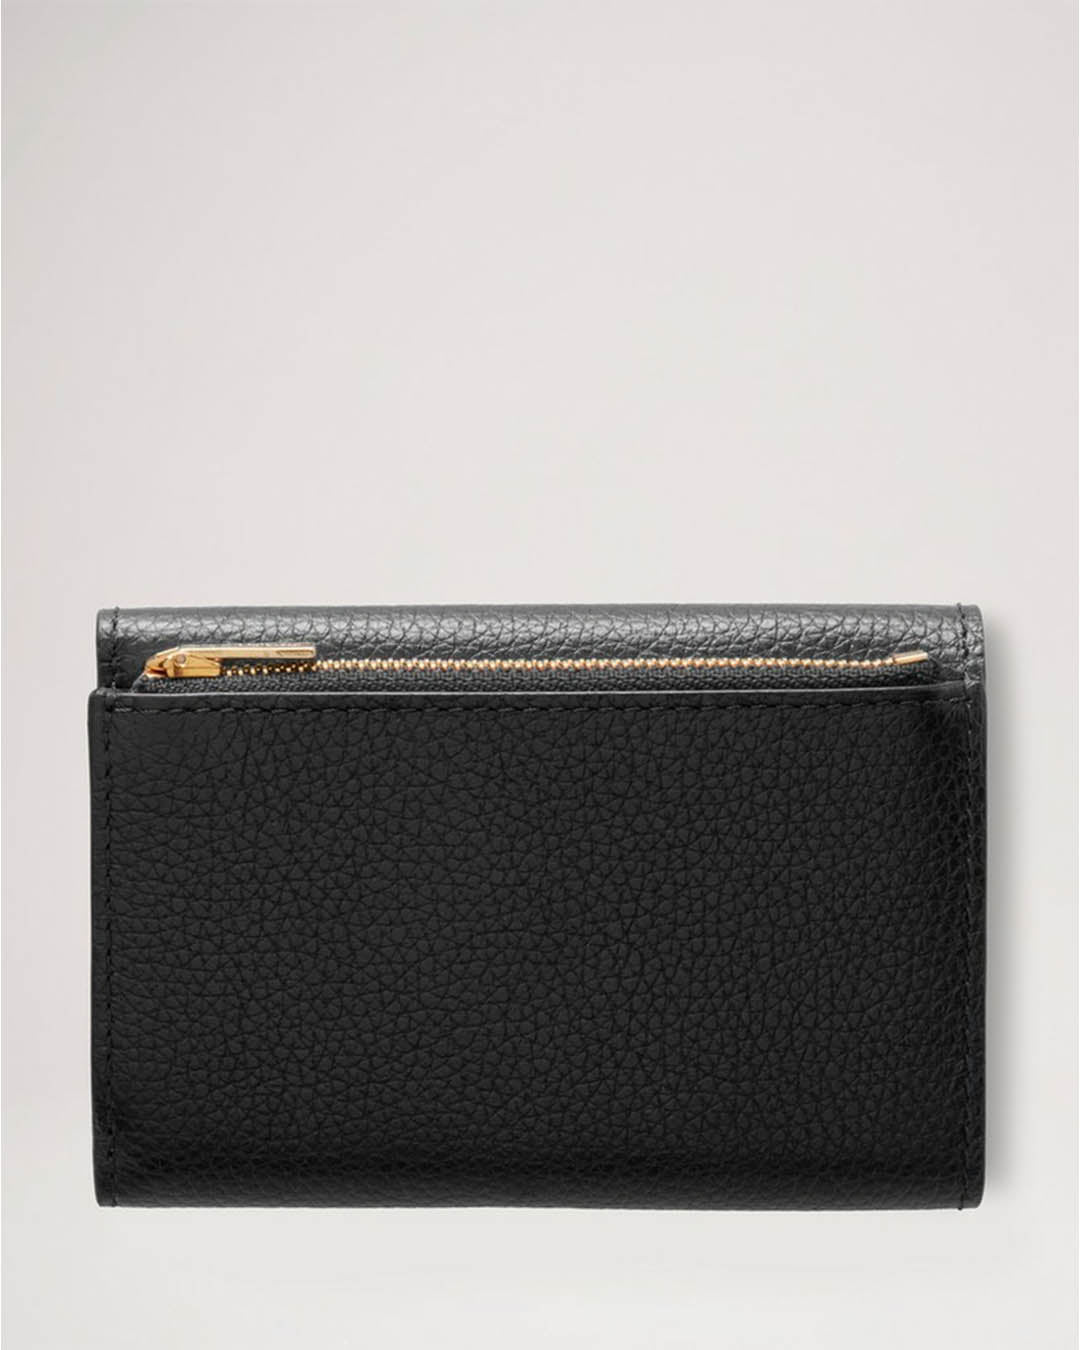 Mulberry Folded Multi-Card Wallet